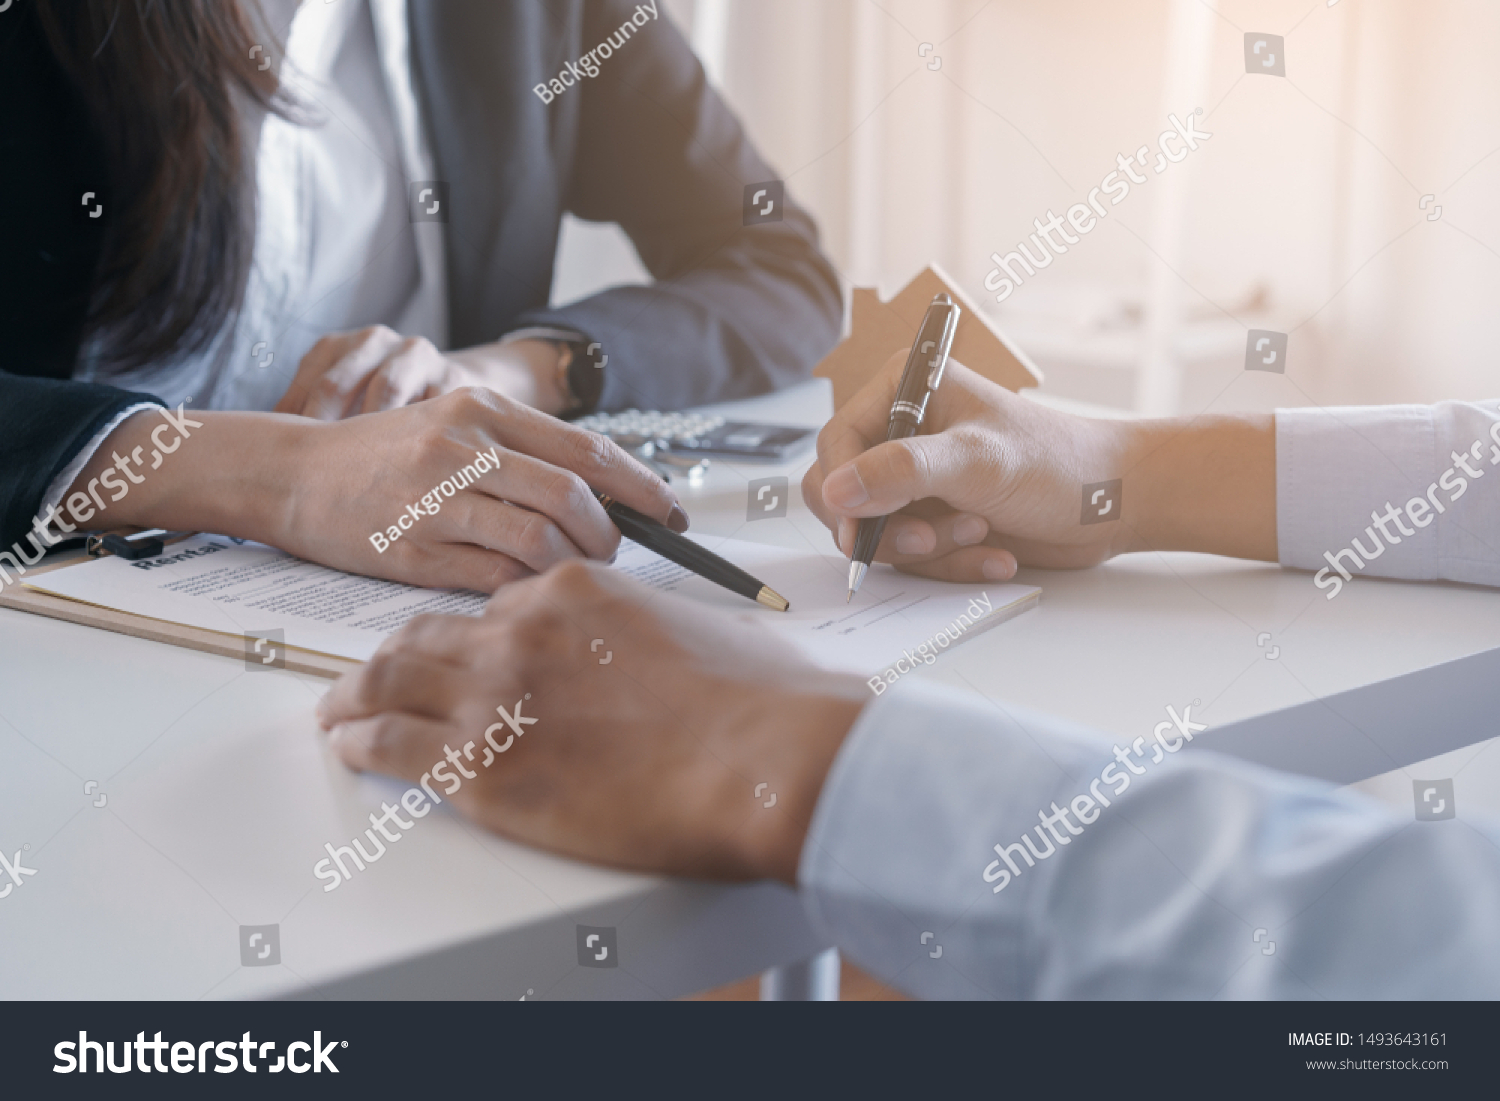 Salesmen are letting the male customers sign the sales contract, Asian women and men are doing business in the office, Business concept and contract signing #1493643161